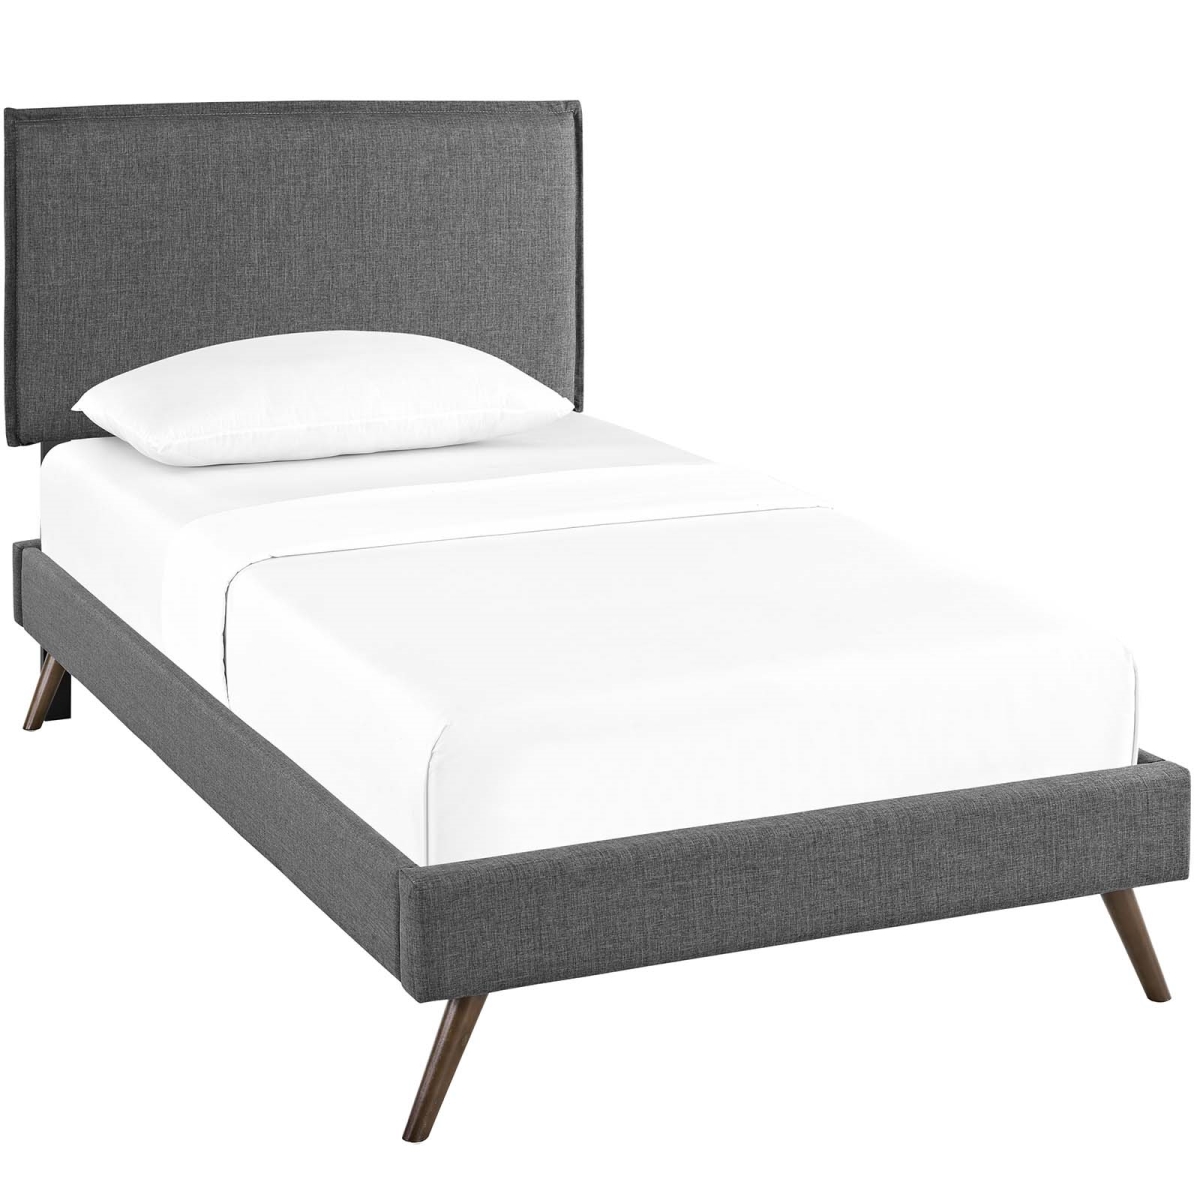 Mod-5902-gry 15.5 X 31.5 X 31.5 In. Amaris Twin Fabric Platform Bed With Round Splayed Legs - Gray